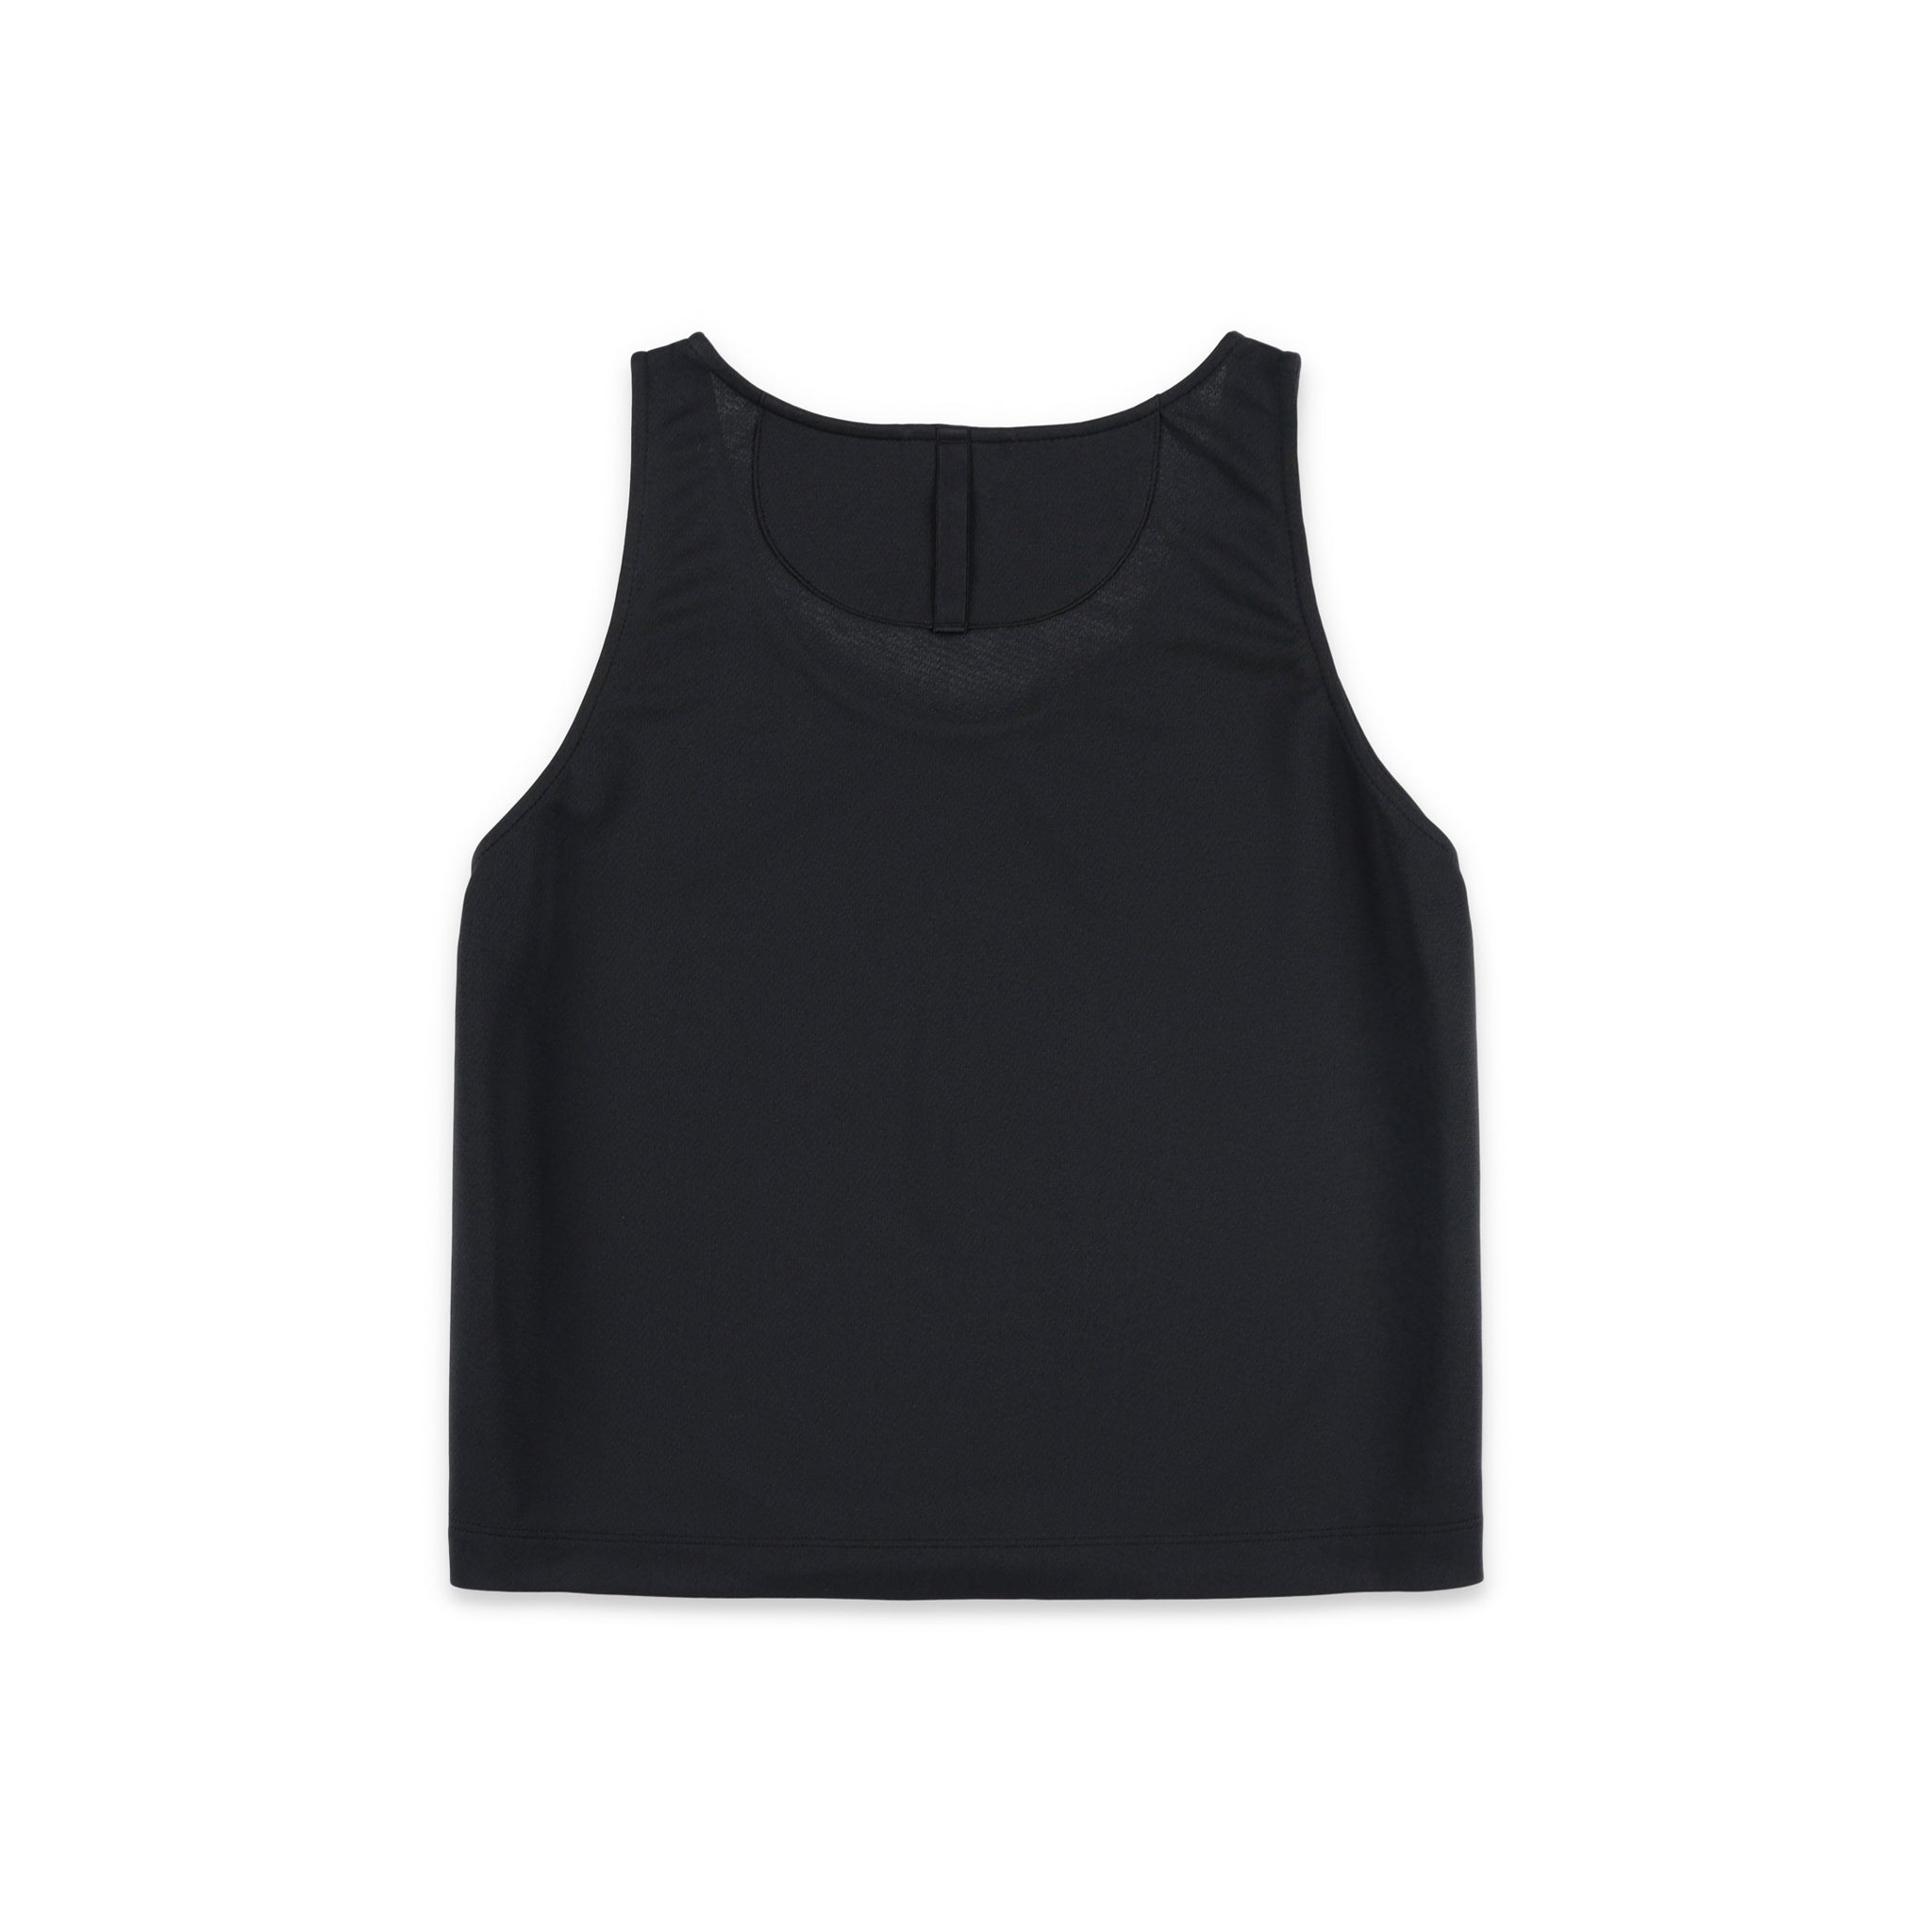 PackFast packing band on back of Topo Designs Women's 30+ UPF moisture wicking River Tank top in "Black".